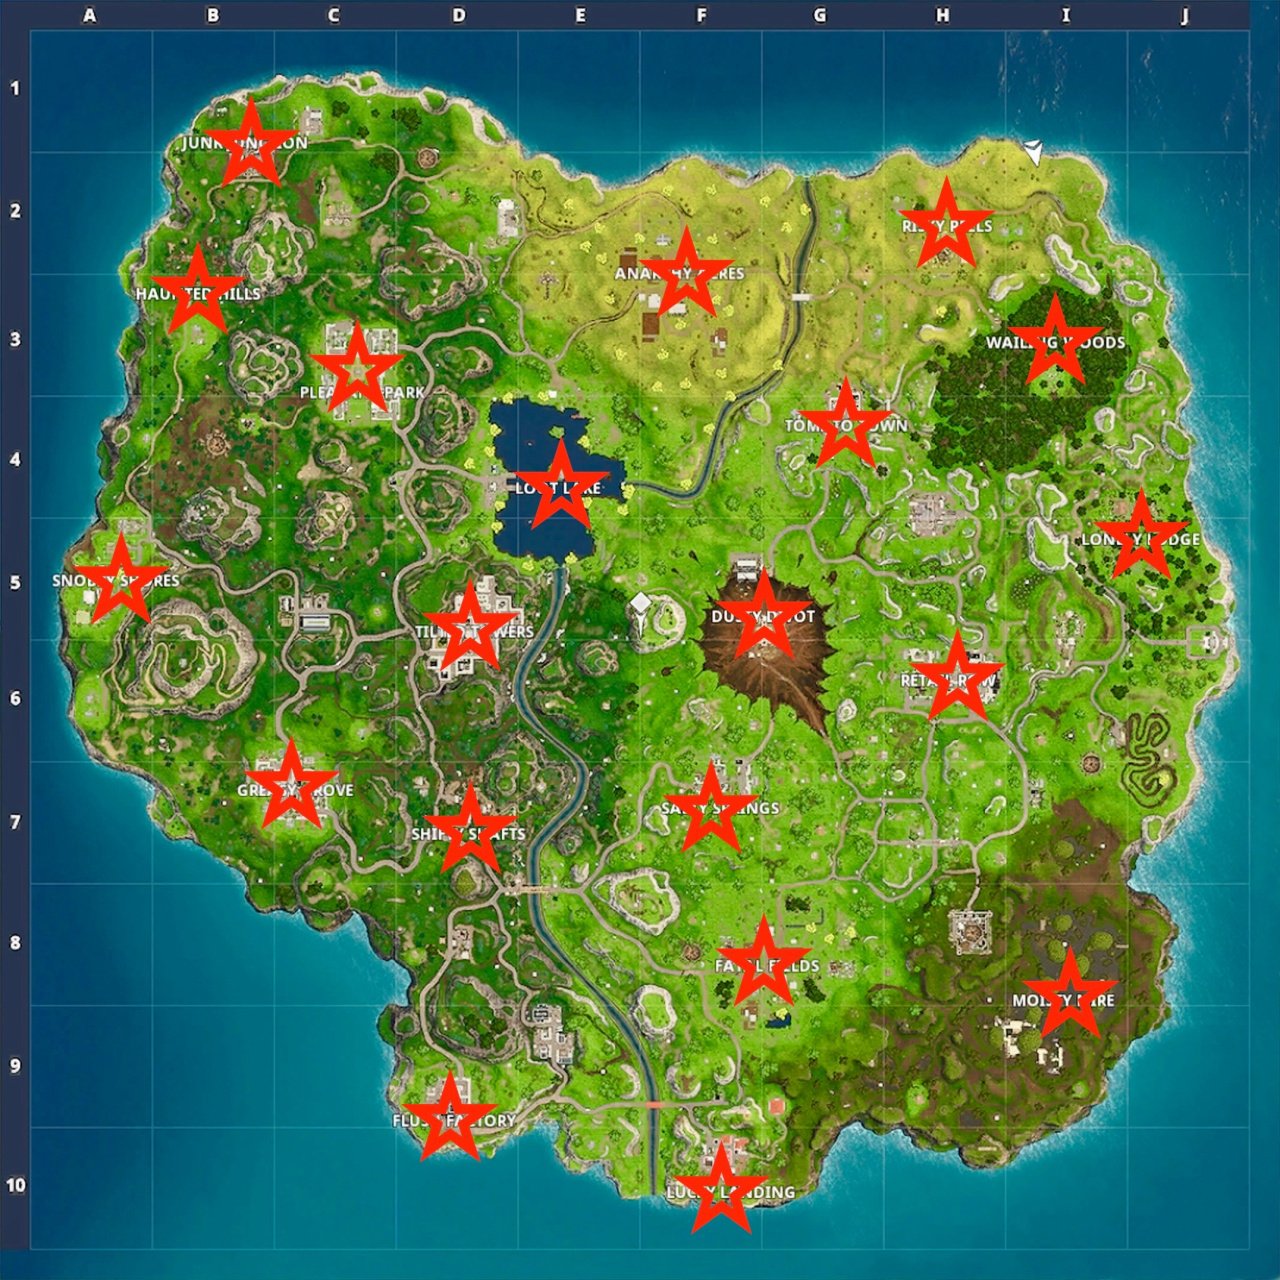 visit named locations in a single match